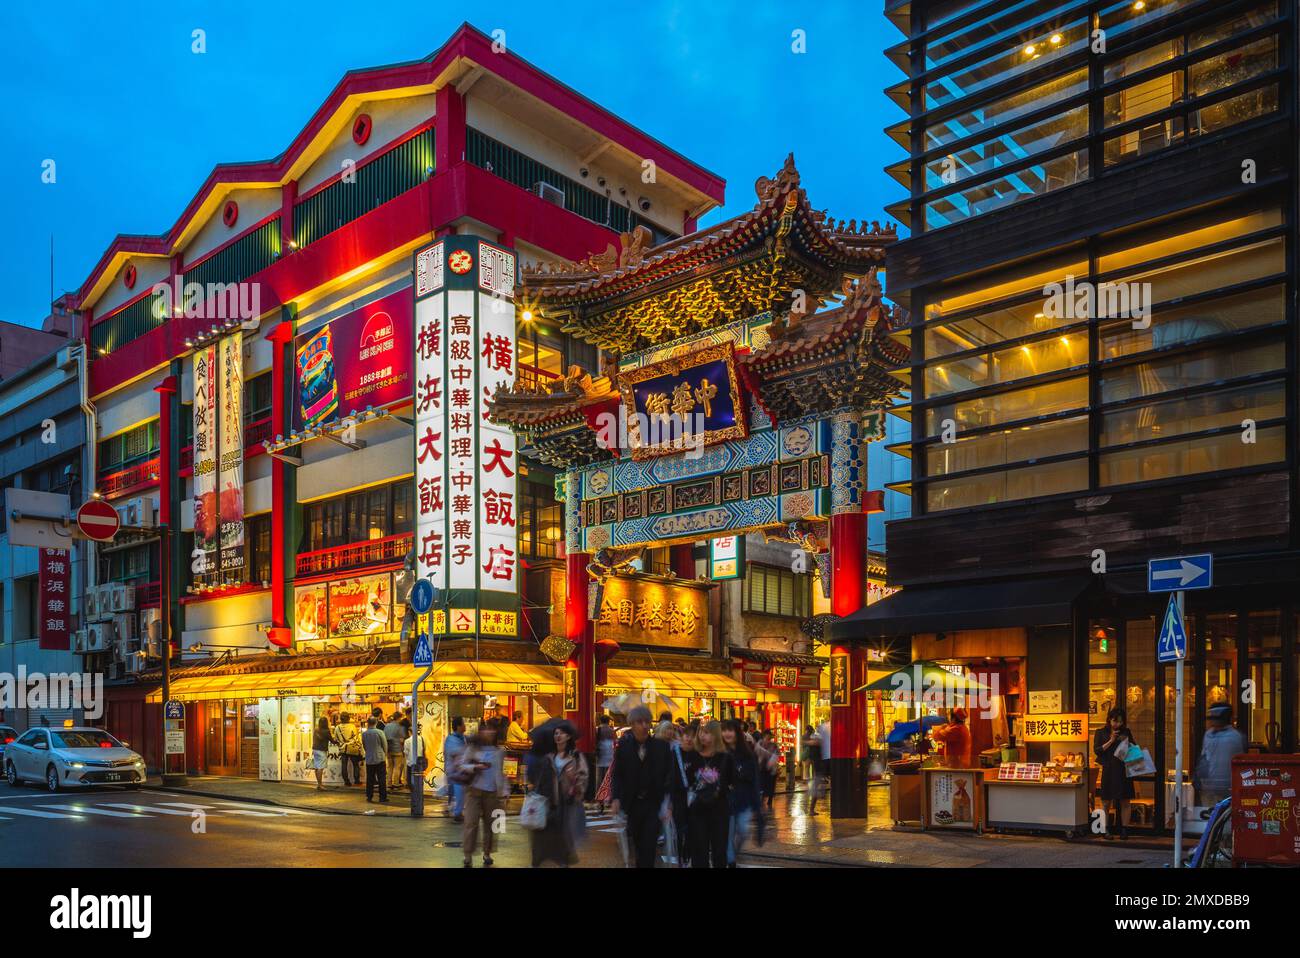 June 15, 2019: Yokohama Chinatown, the largest Chinatown with a population of about 3000 to 4000, was about 160 years old and located at yokohama, Jap Stock Photo